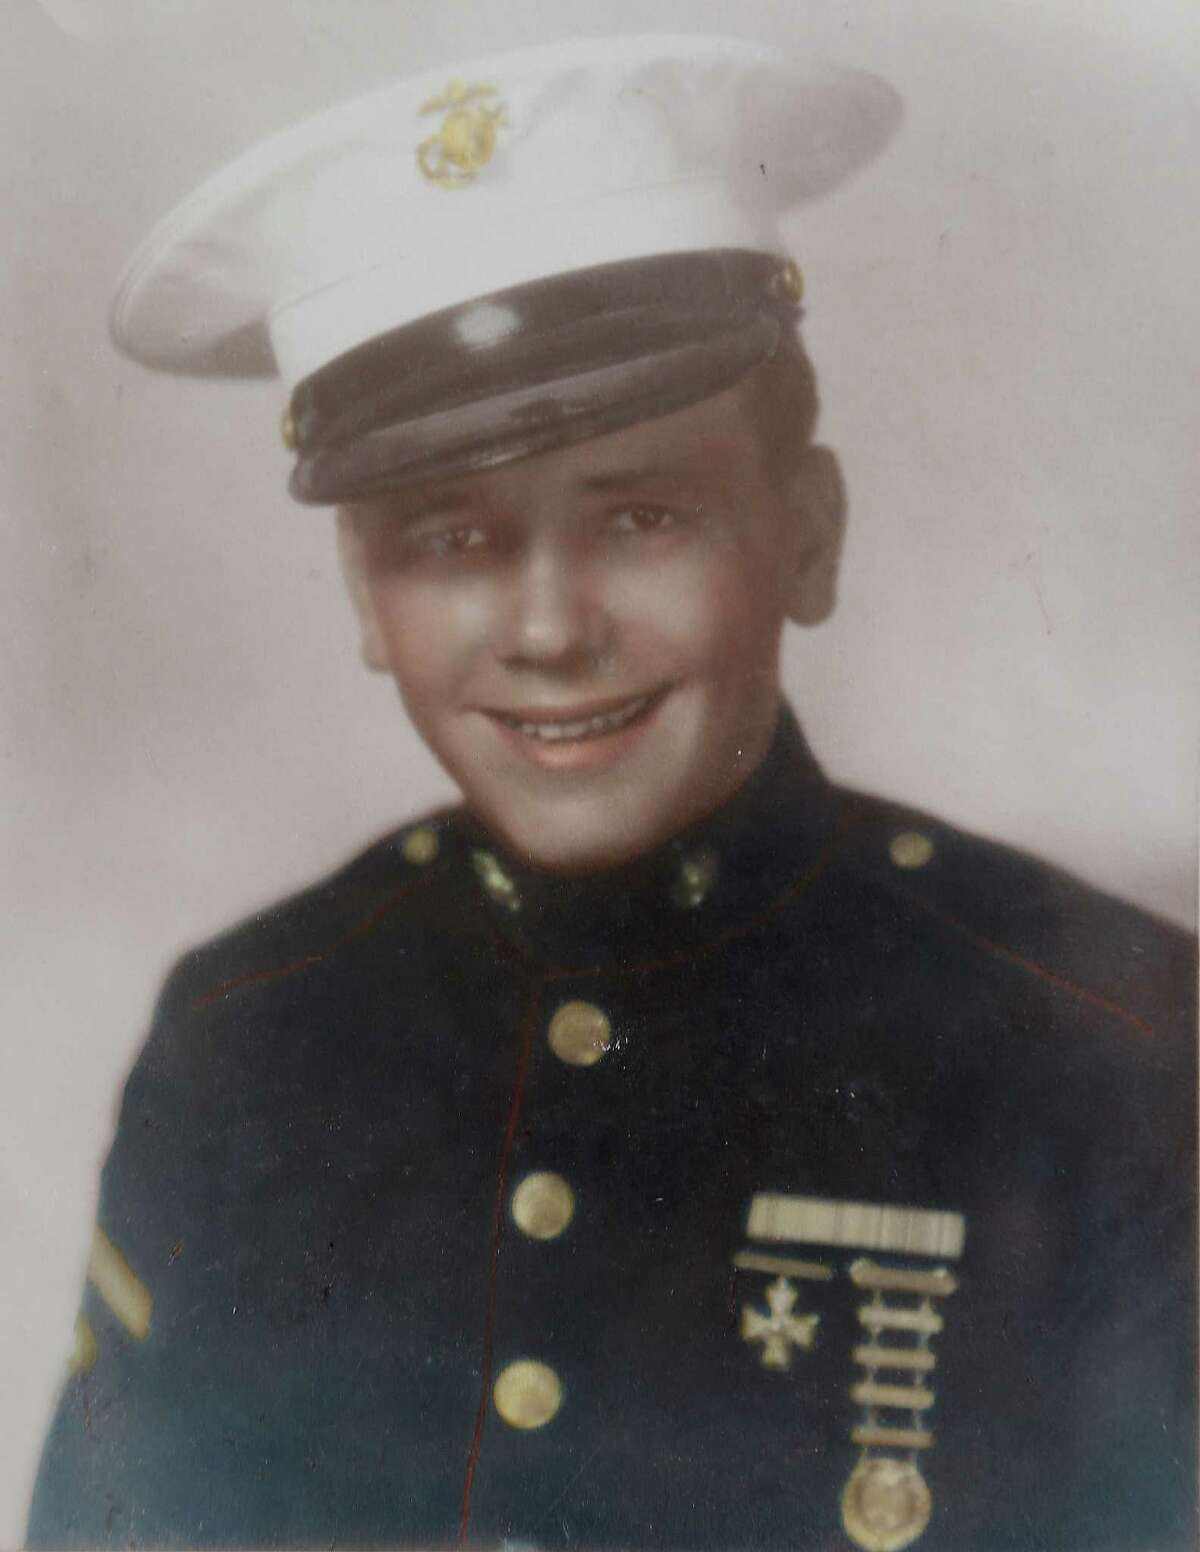 Bill Sherrill, then 15, lied about his age to join the U.S. Marines after Pearl Harbor.